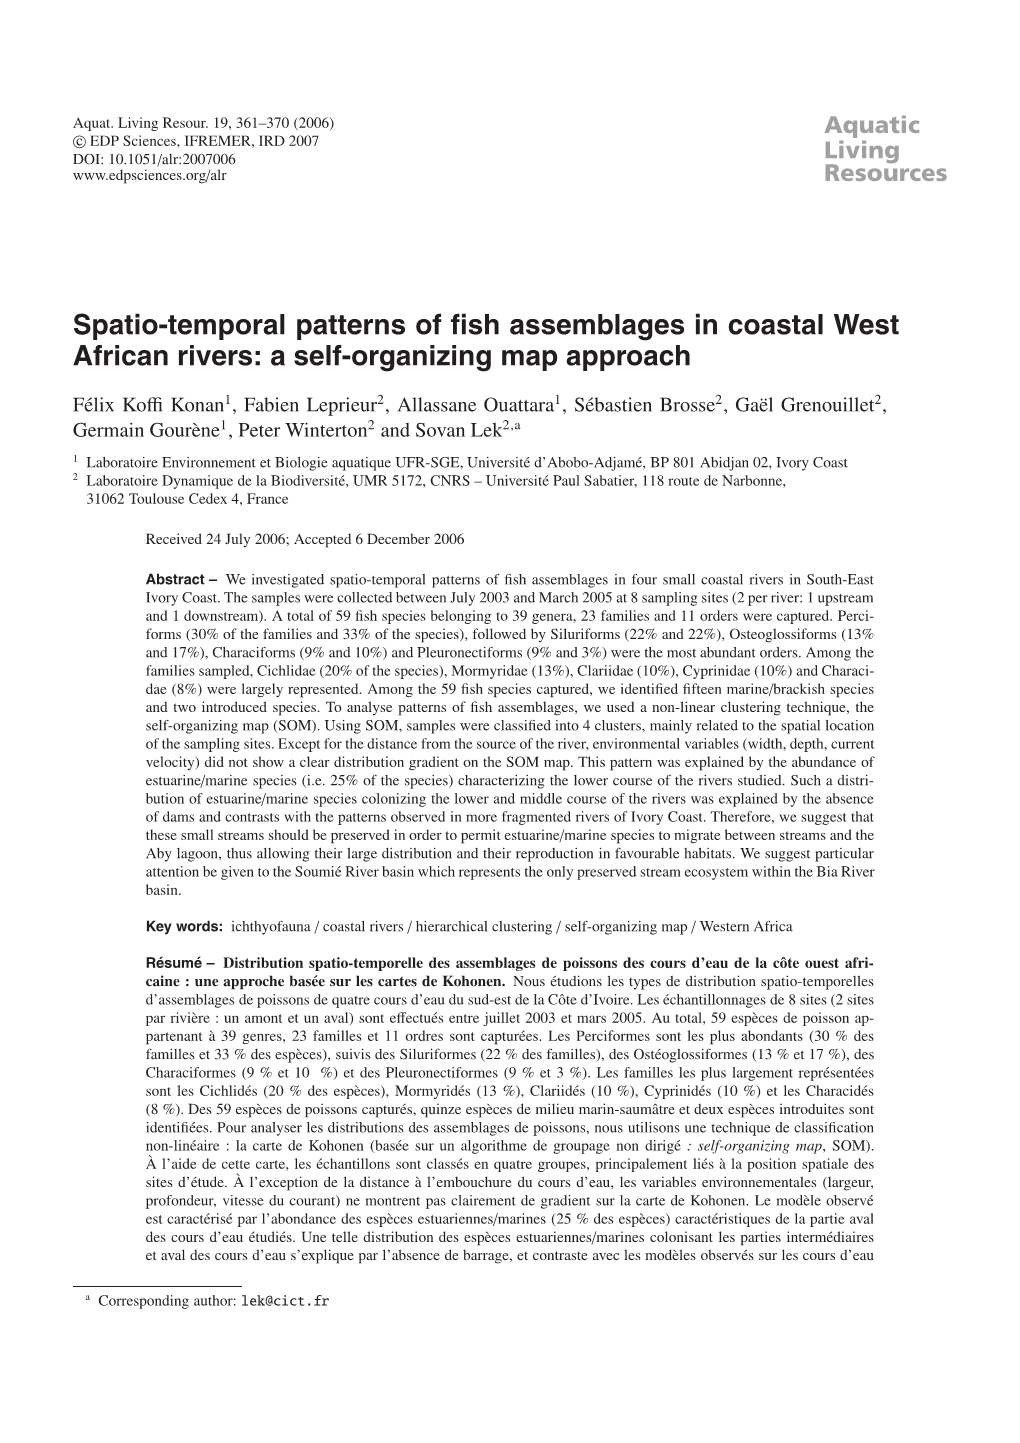 Spatio-Temporal Patterns of Fish Assemblages in Coastal West